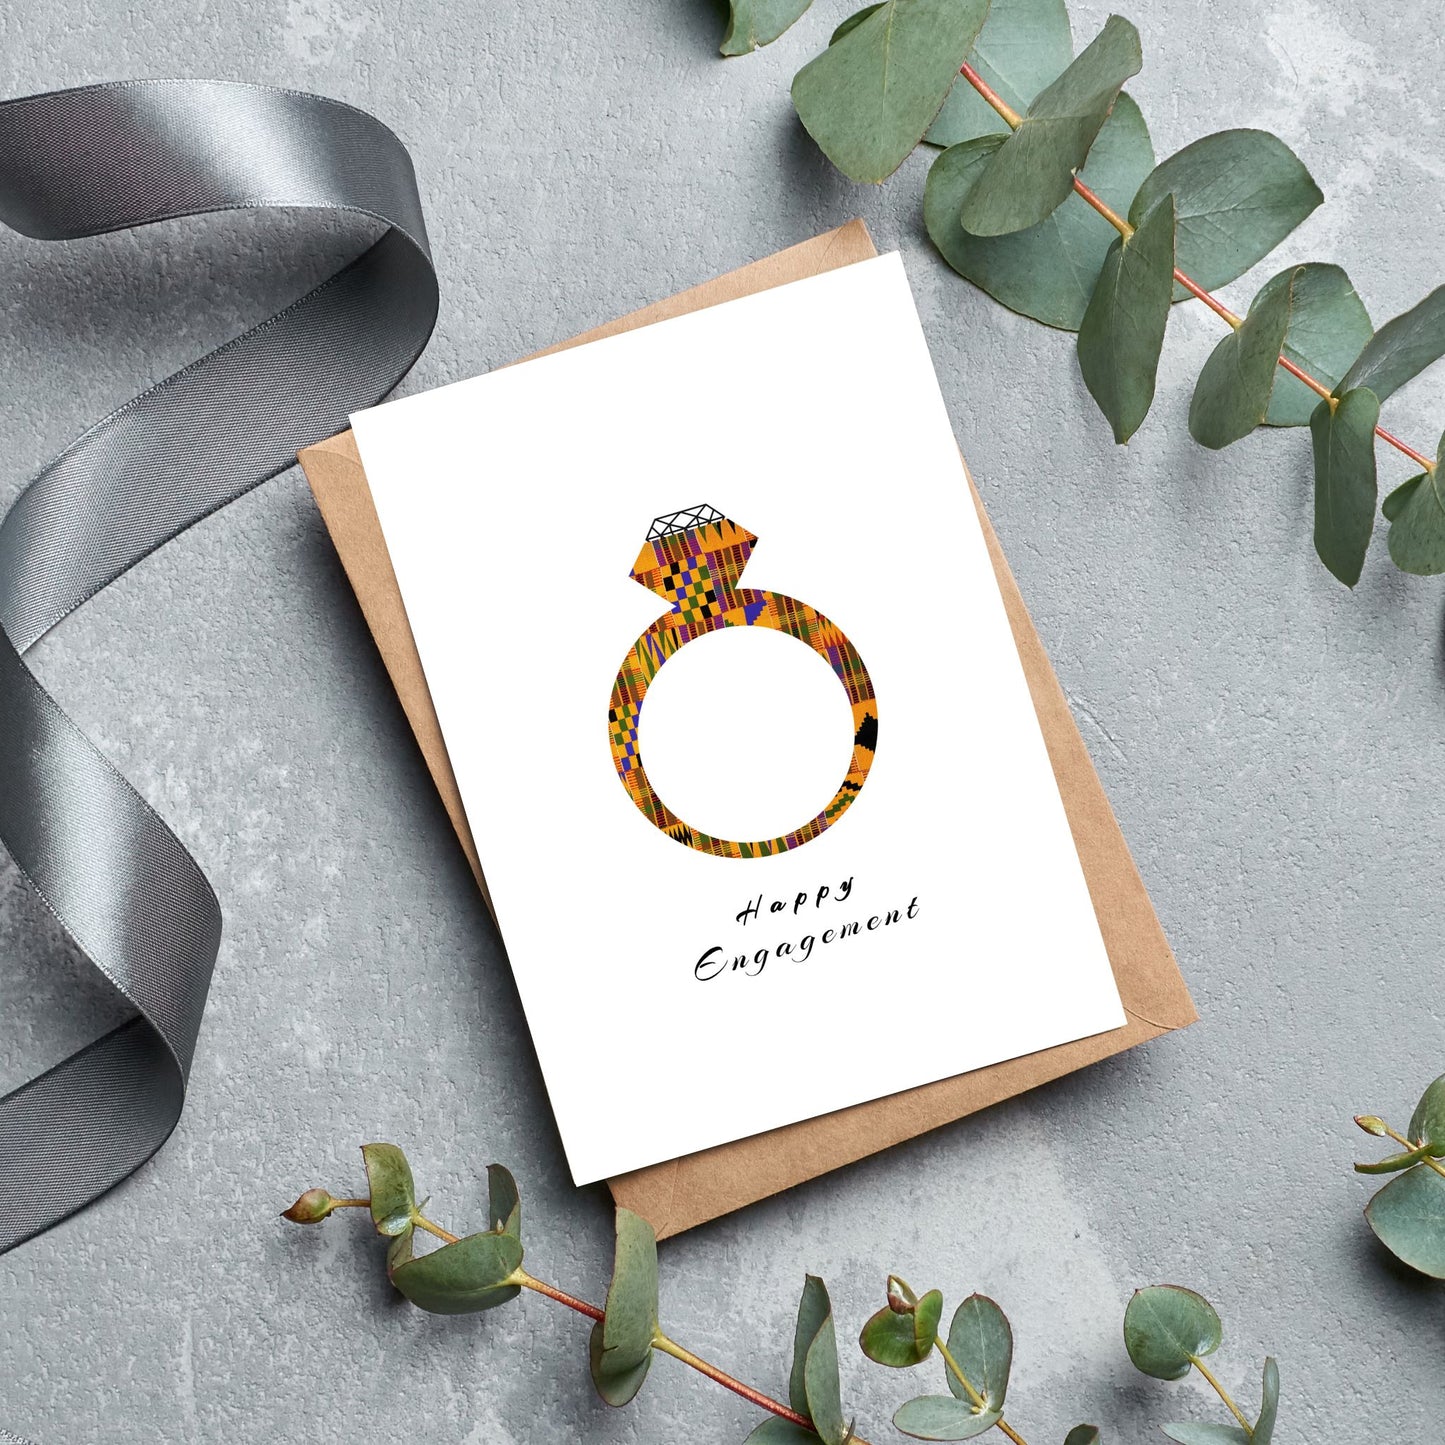 Happy Engagement Kente Print Inspired Card decorated with Crystals Cards for Weddings